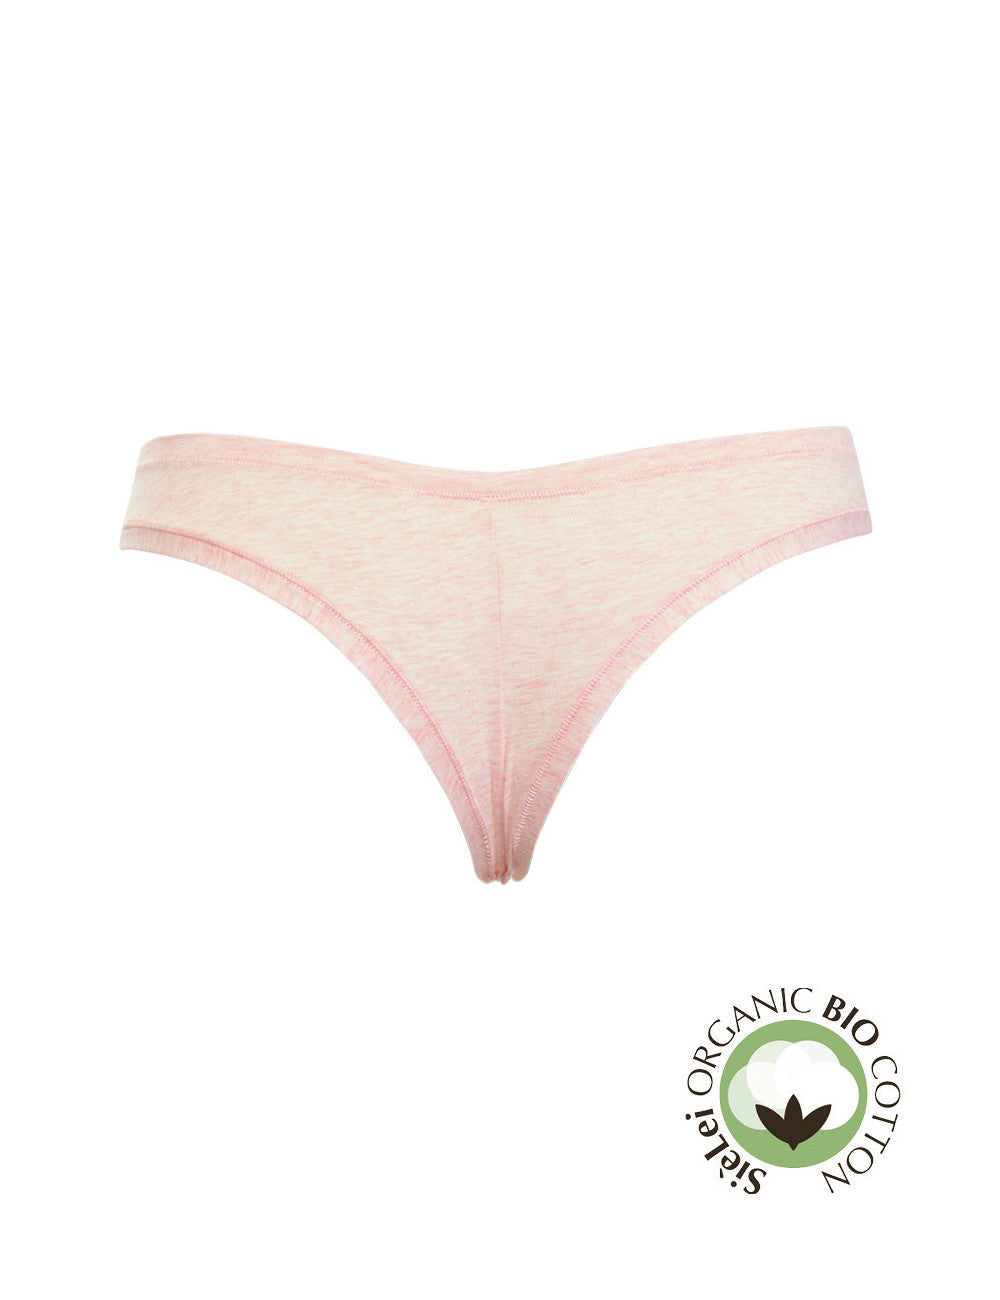 SIéLEI's Organic Cotton Brazilian Panties from Italy are crafted with hand-picked organic cotton to create a thin, soft, stretchy fabric. 